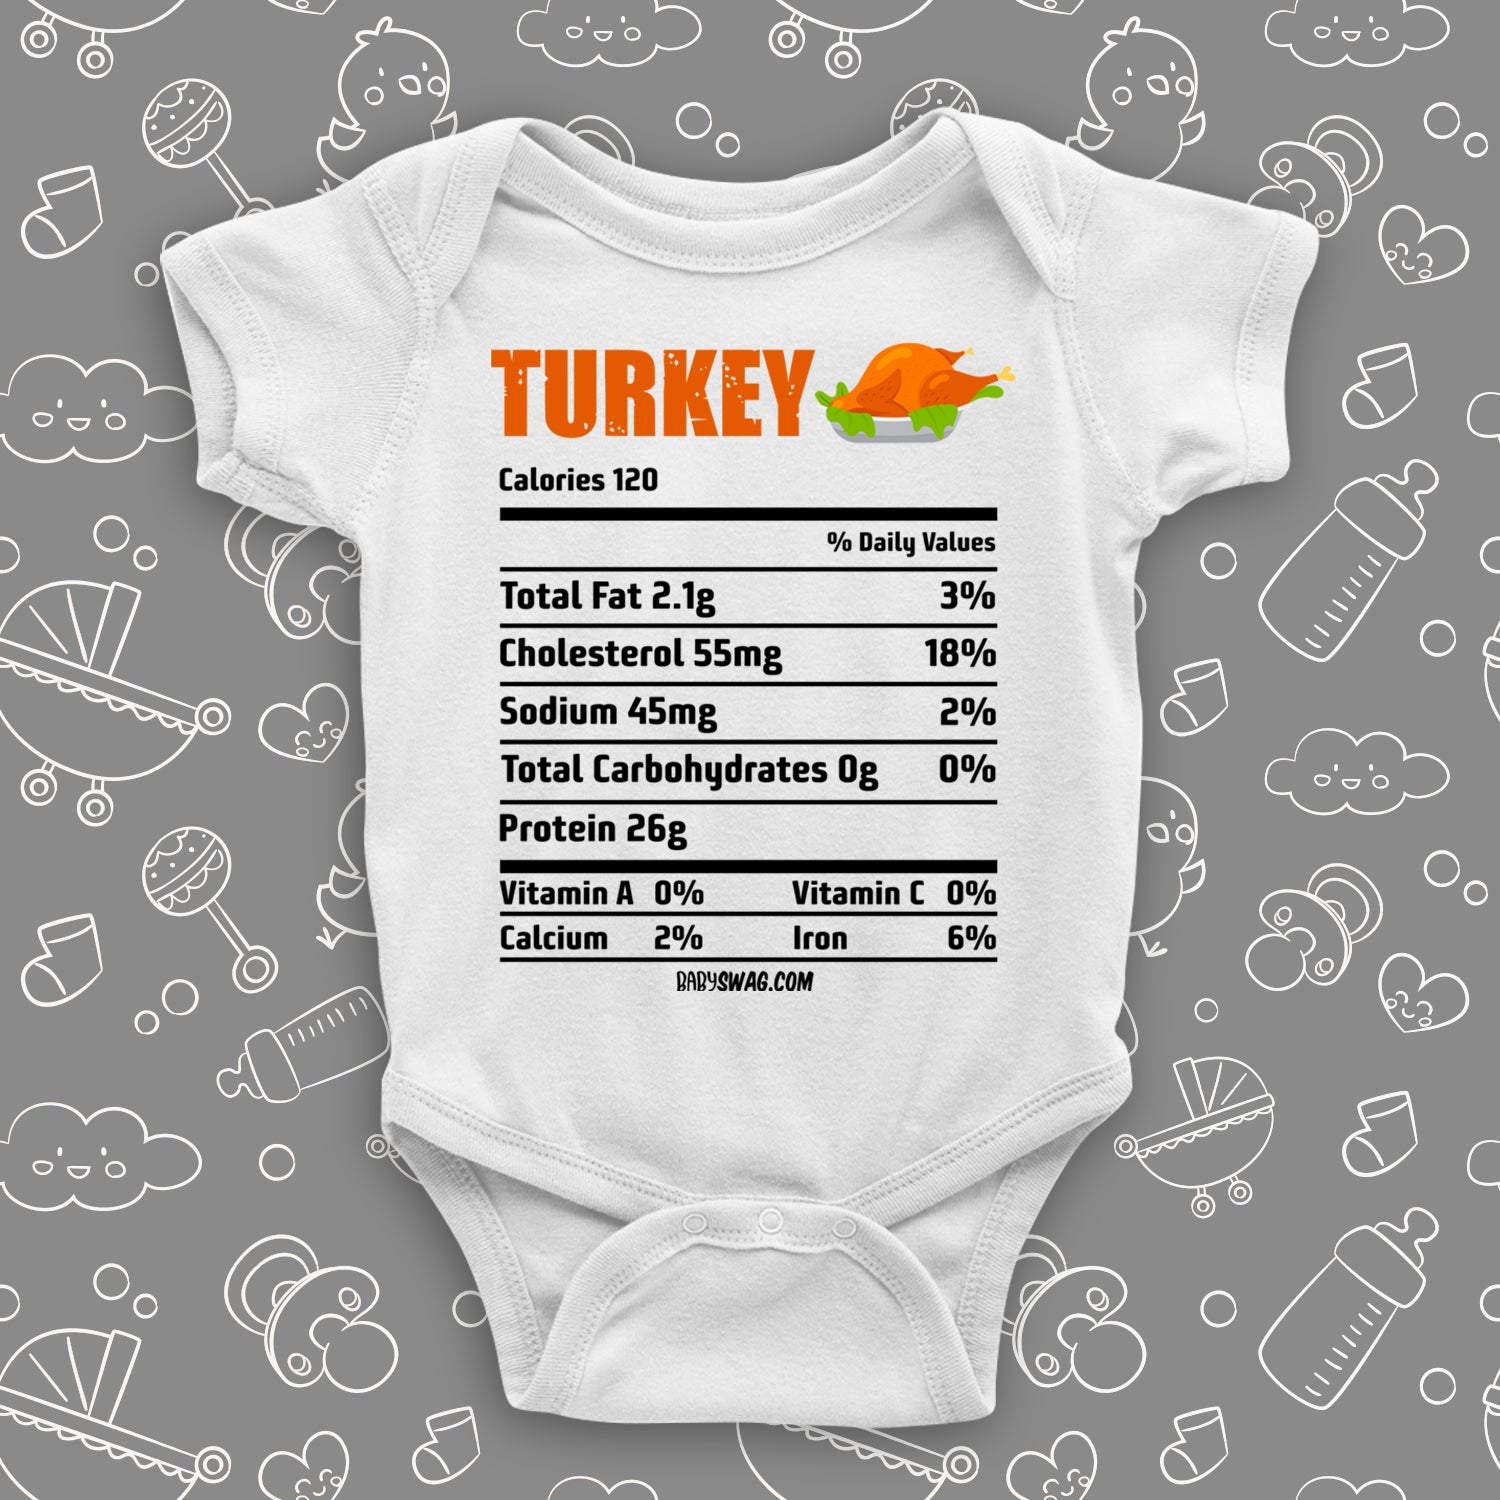 The "Turkey Nutrition Facts" cute baby onesies in white. 